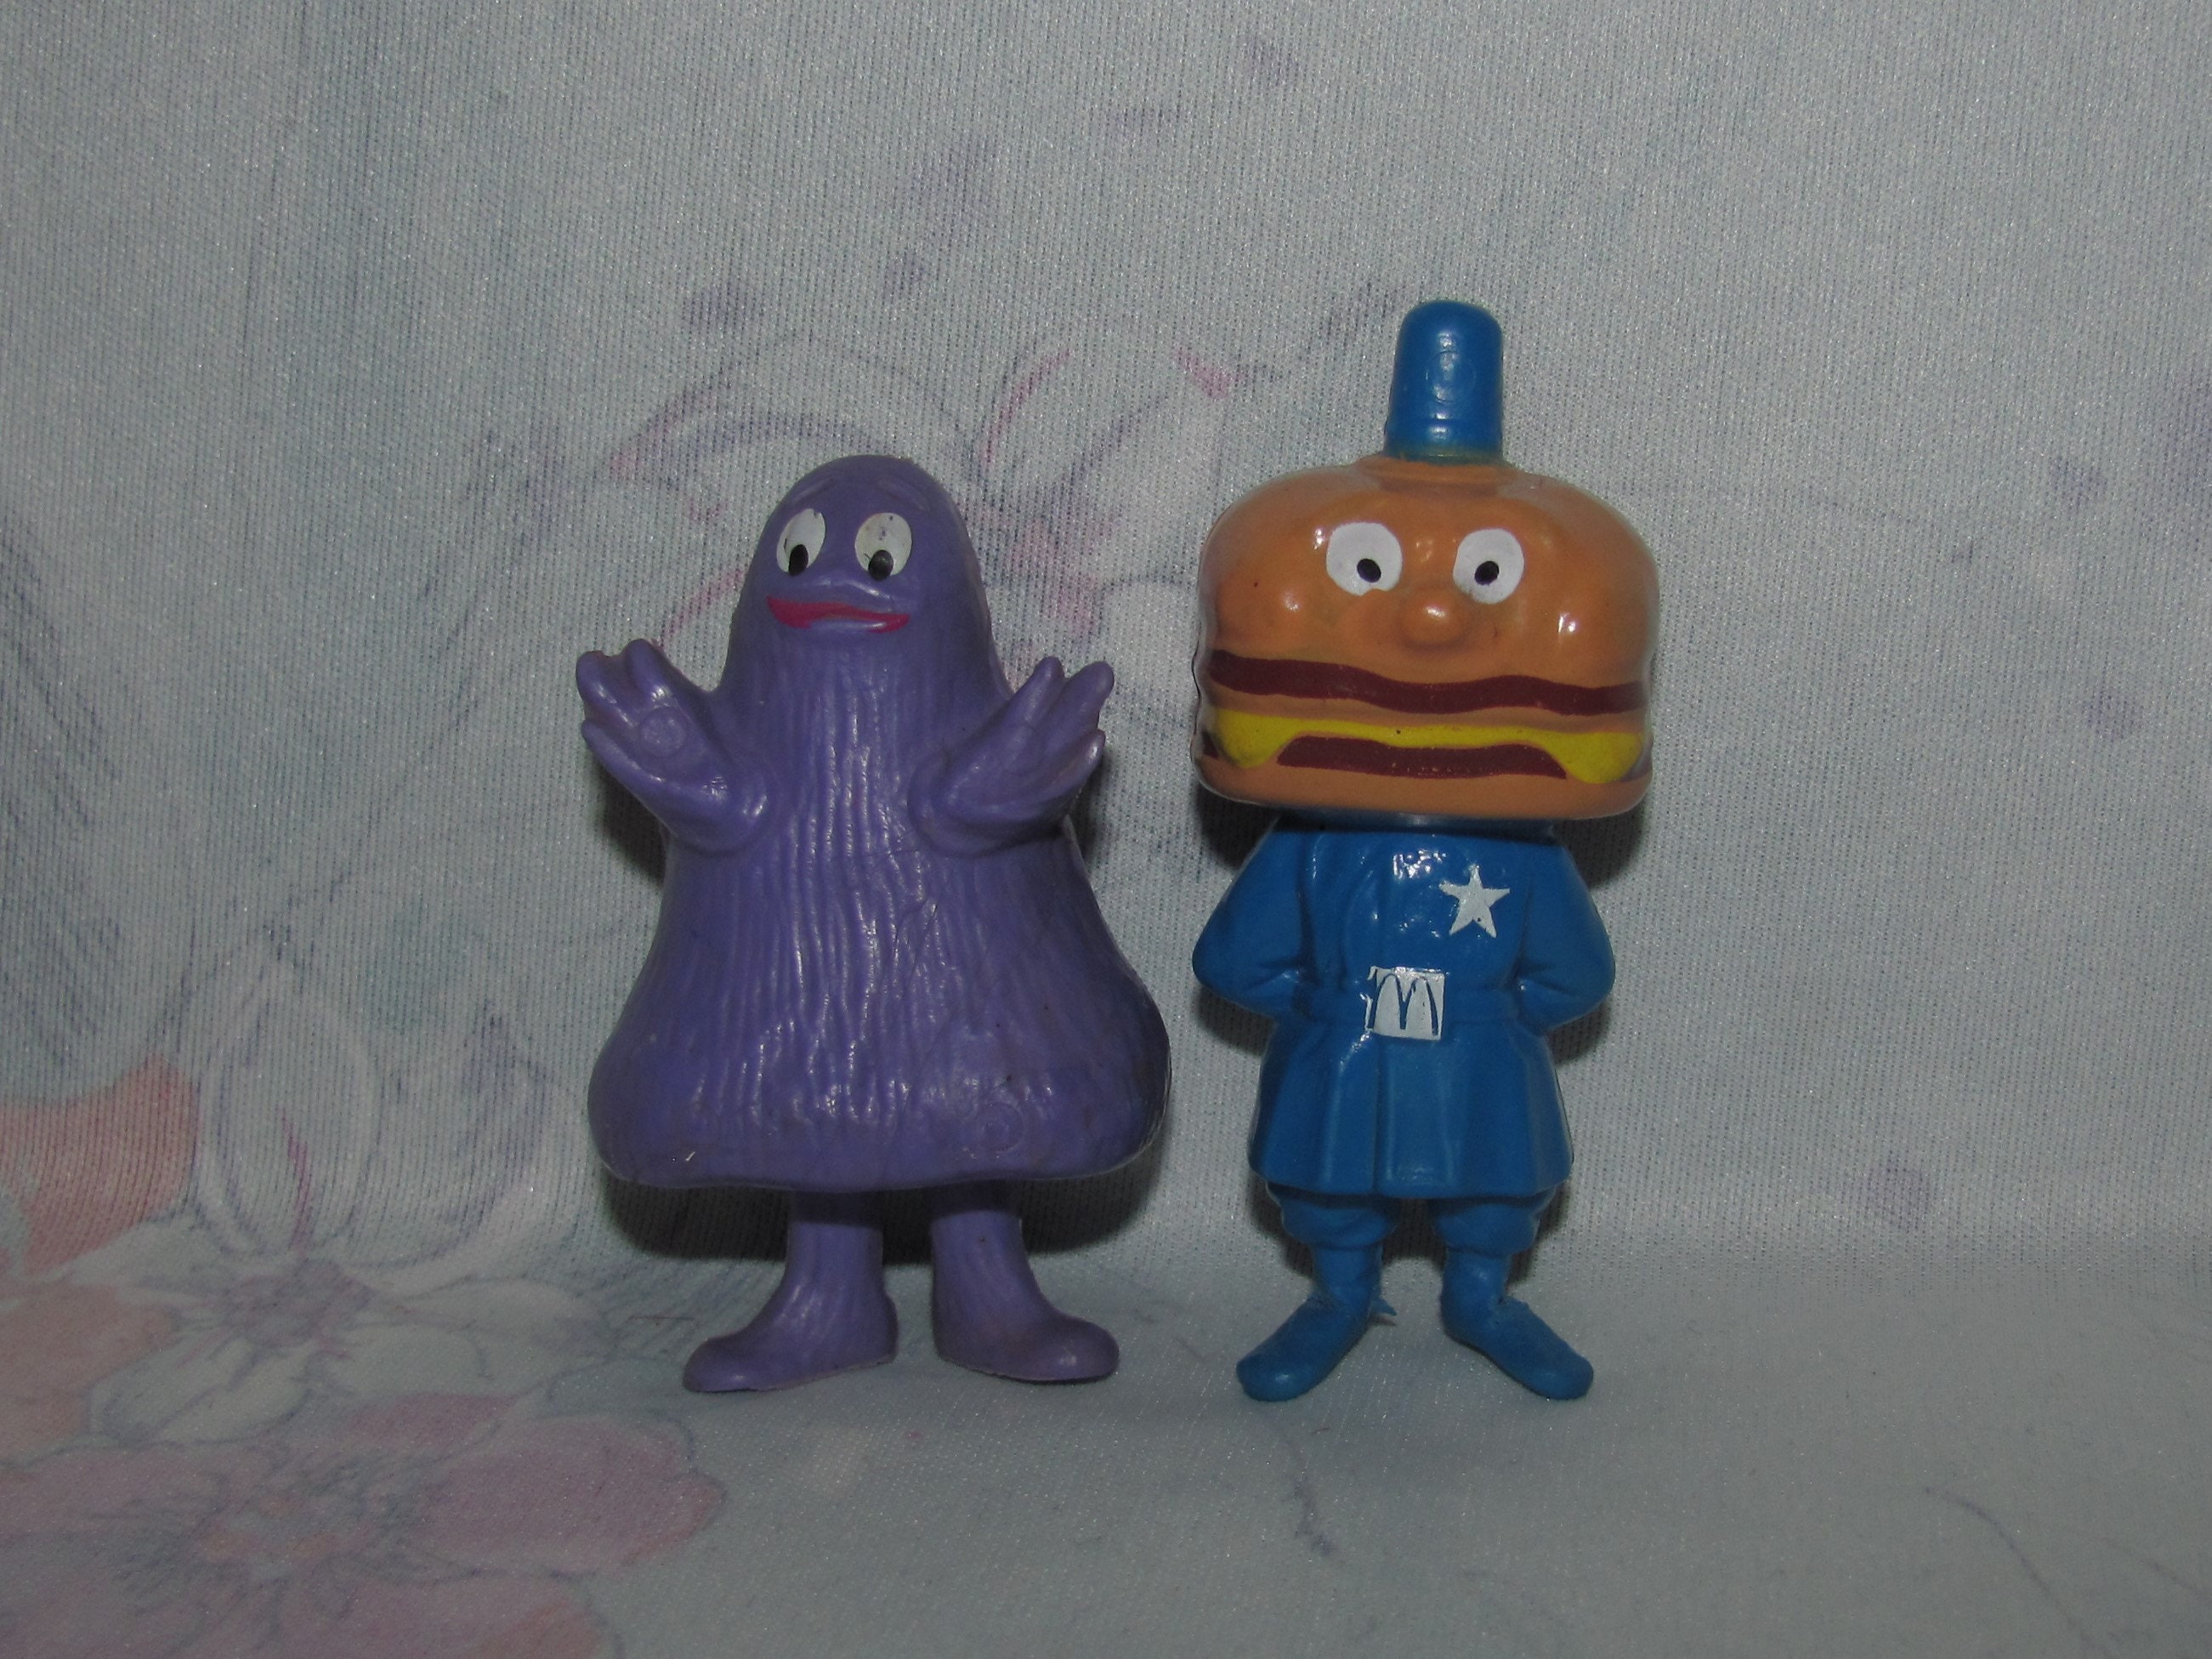 MINIATURE Grimace Shake Prop/accessory for 6 Dollhouse/action Figures 